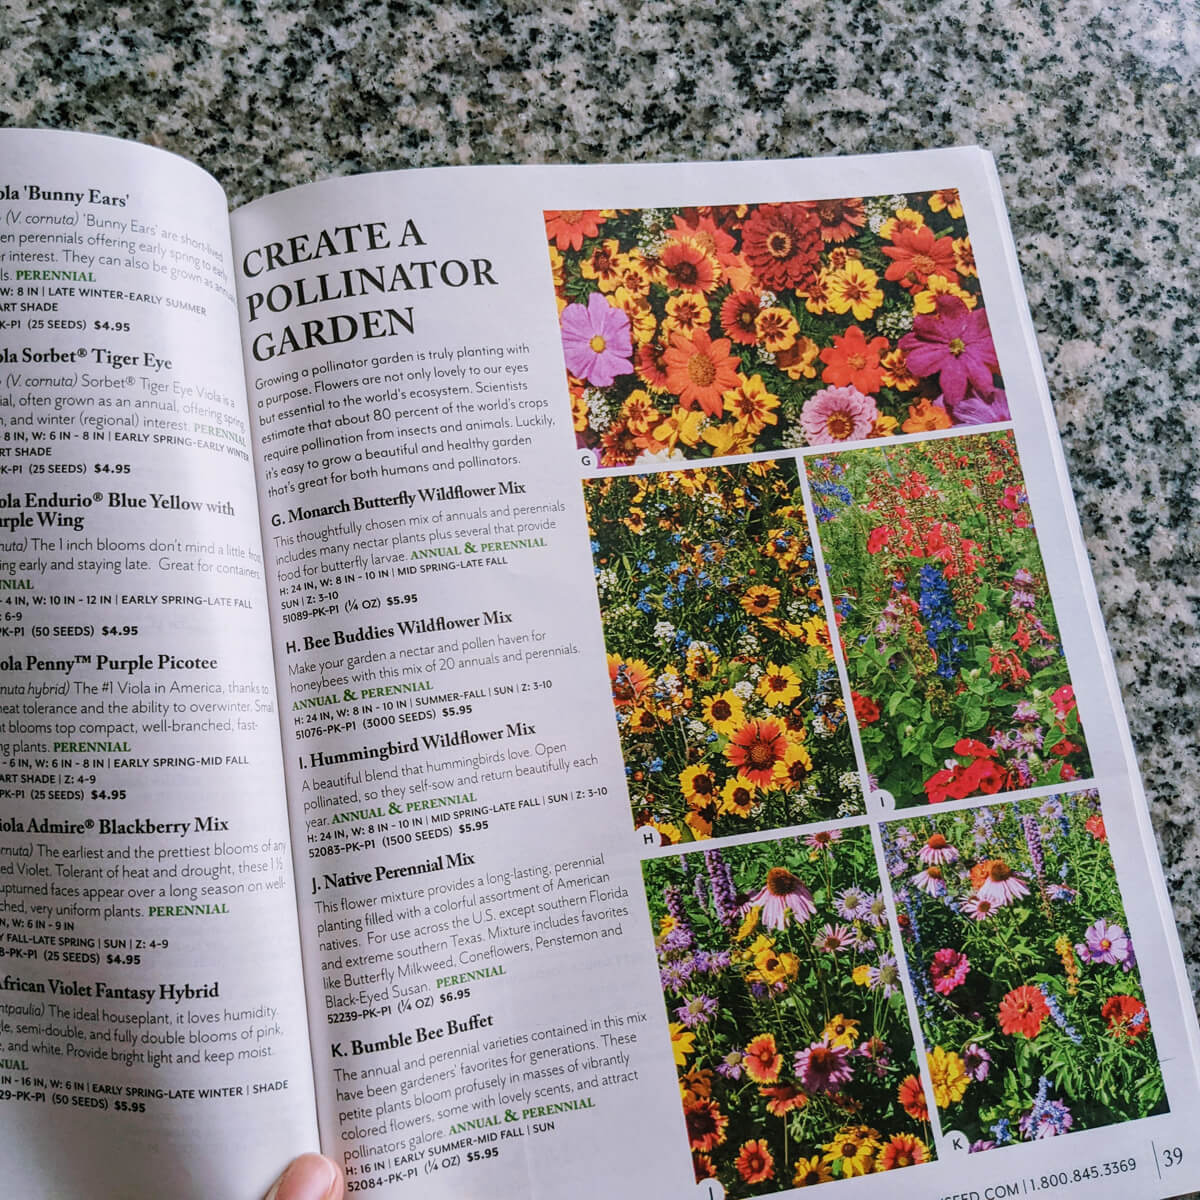 Free Park Seed Catalog - themed for Pollinator Garden